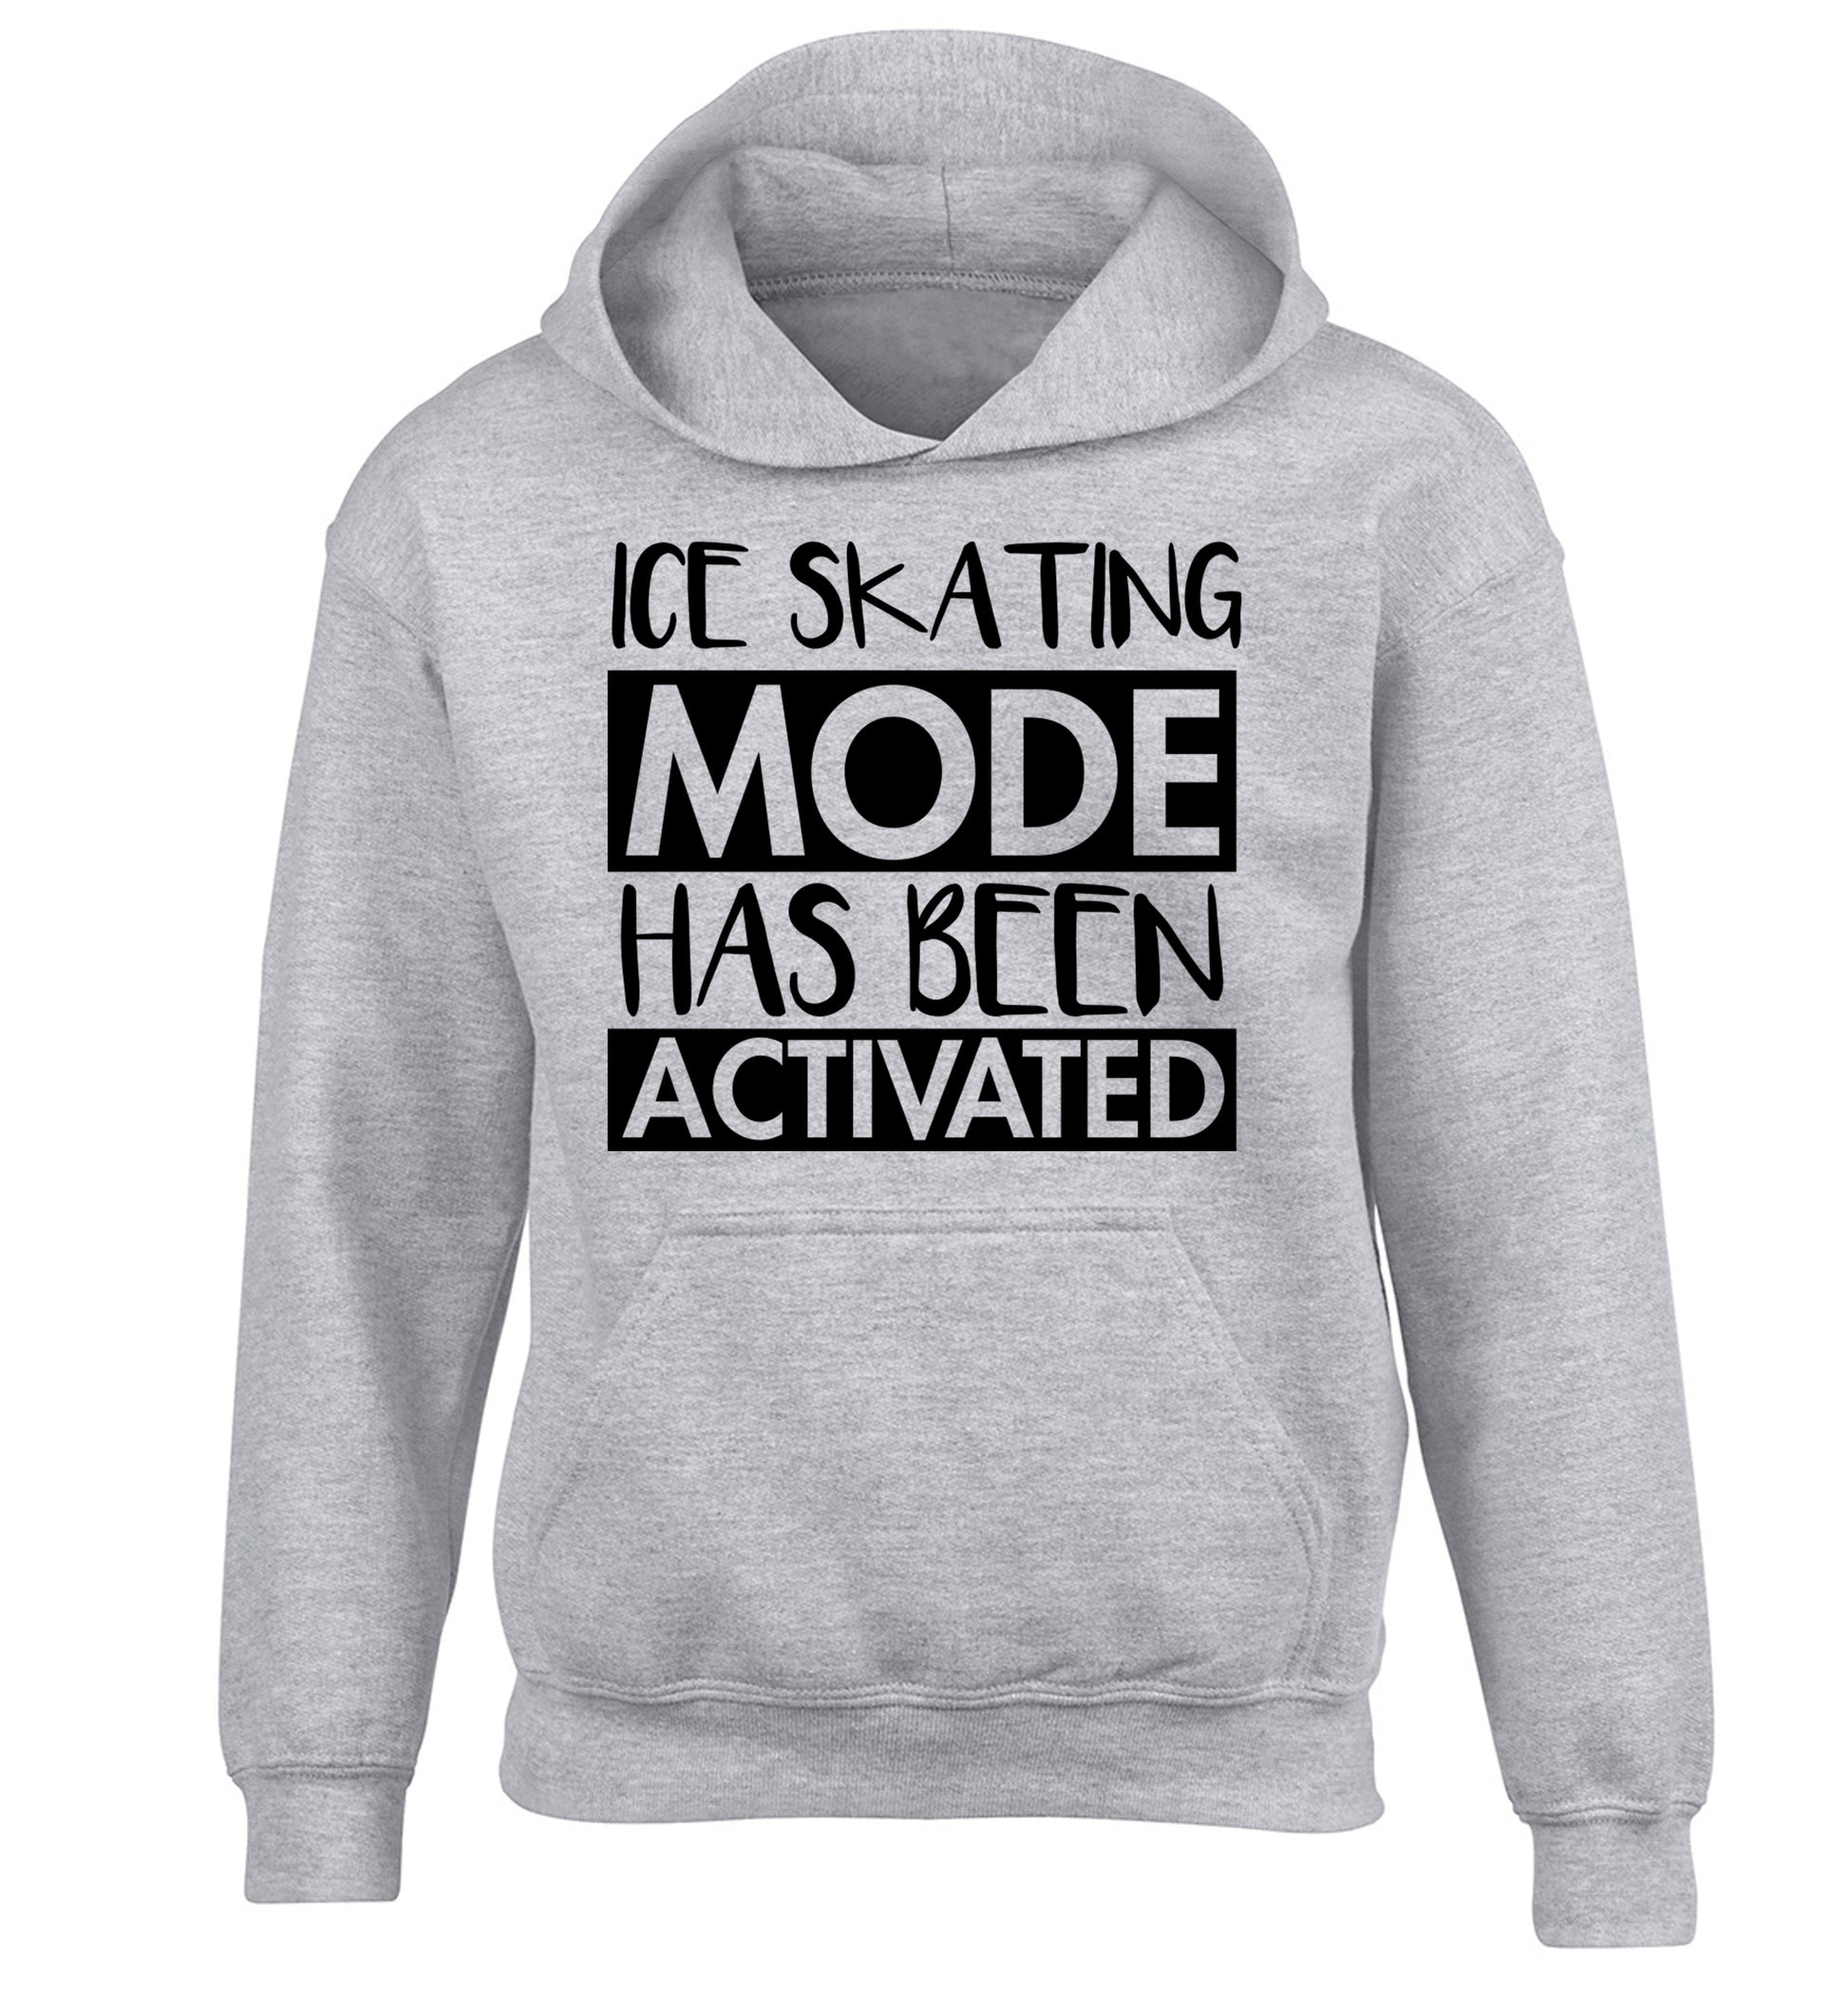 Ice skating mode activated children's grey hoodie 12-14 Years